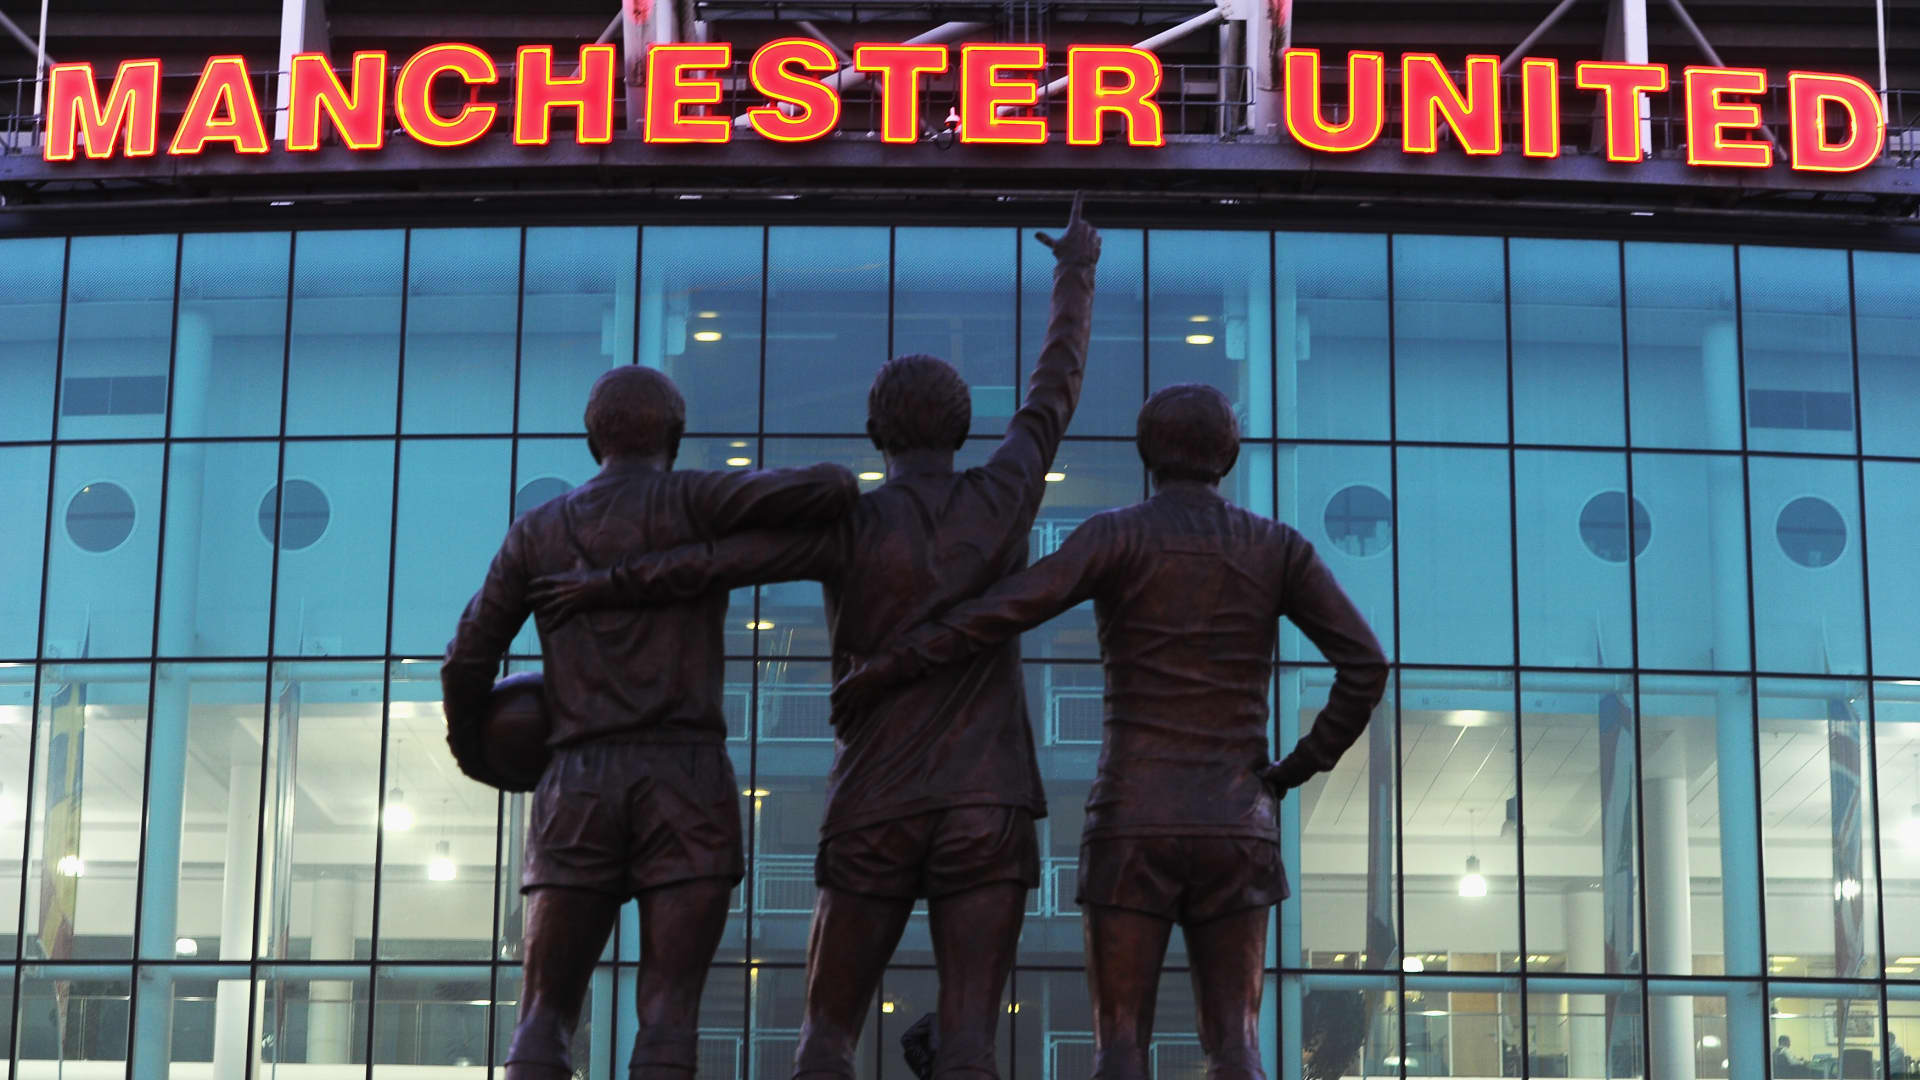 A statue of George Best, Denis Law and Bobby Charlton standing outside Old Trafford, home of Manchester United in Manchester, England.